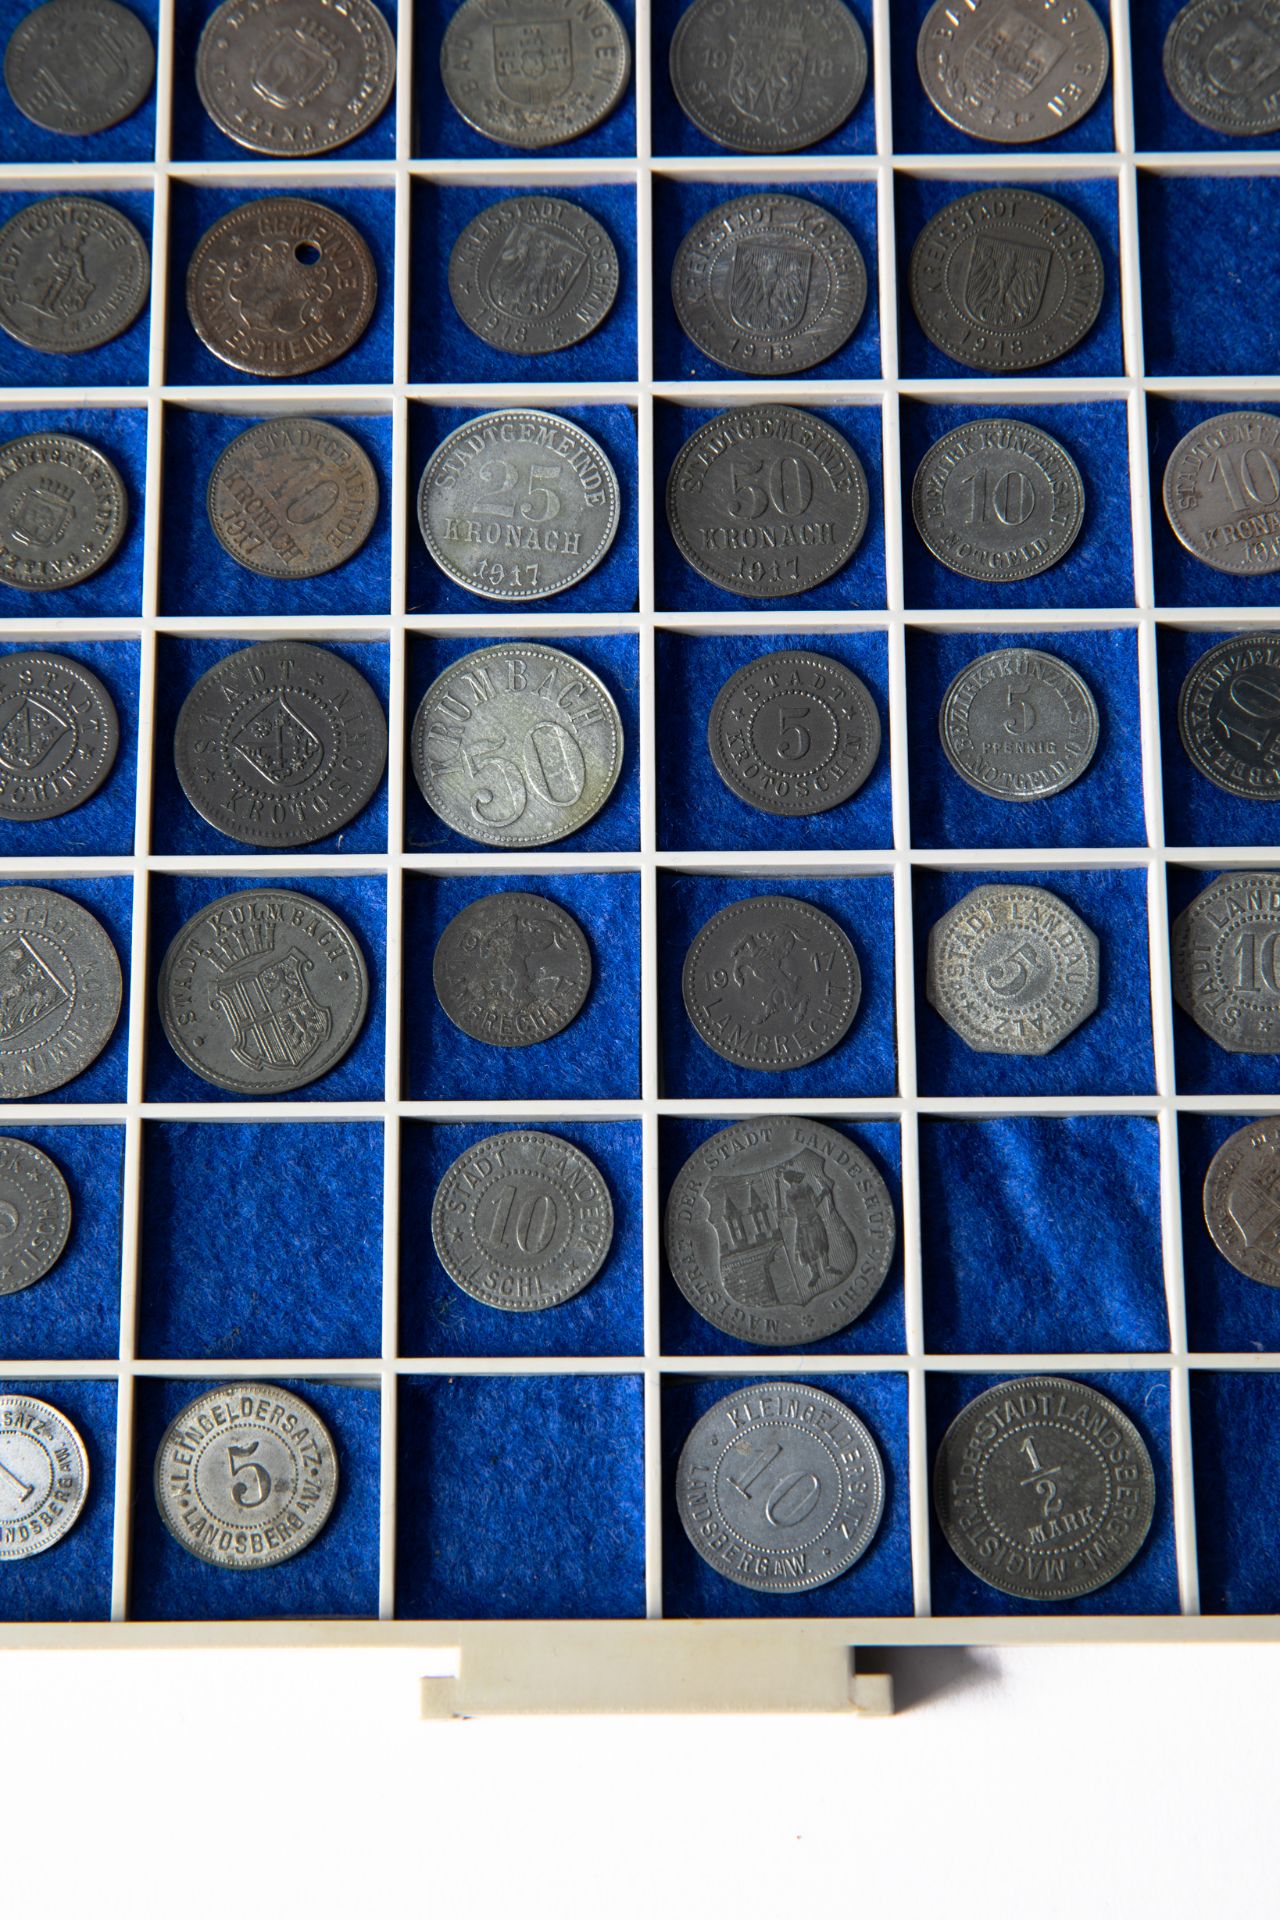 Emergency coins Germany cities from H-L, 245 pieces - Bild 4 aus 22